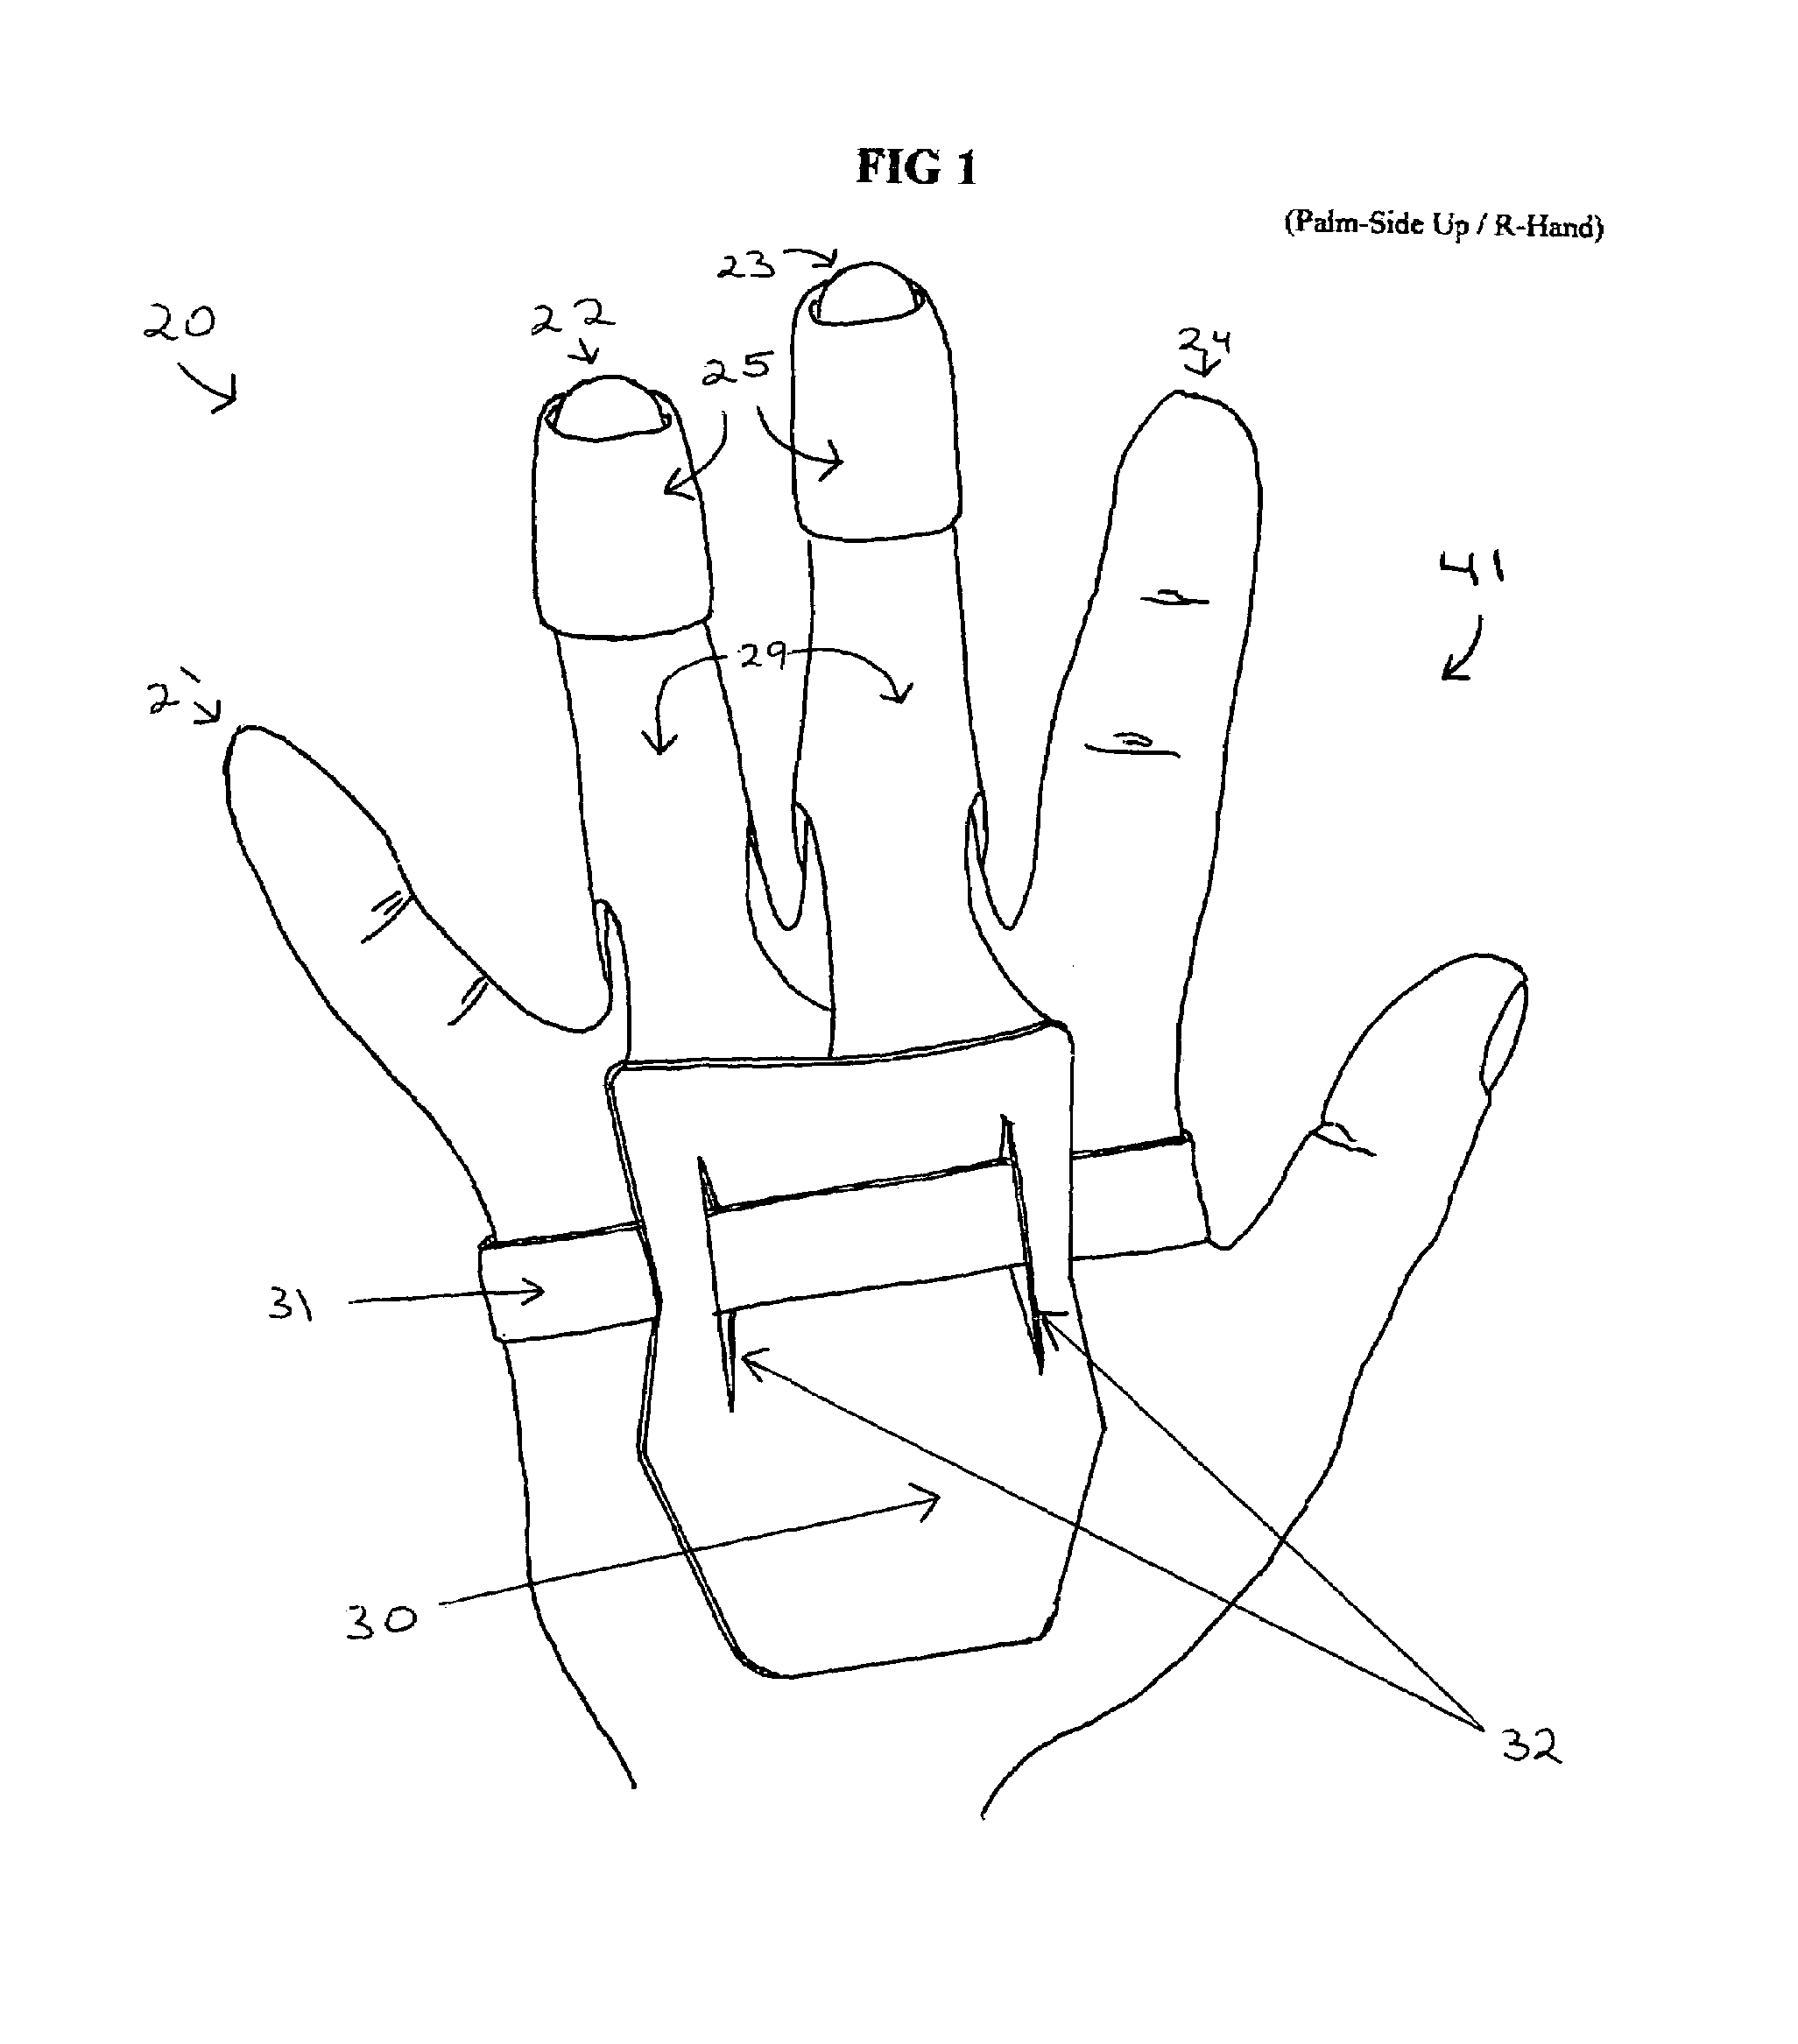 Functional control/grip-enhanced sports glove for bowling